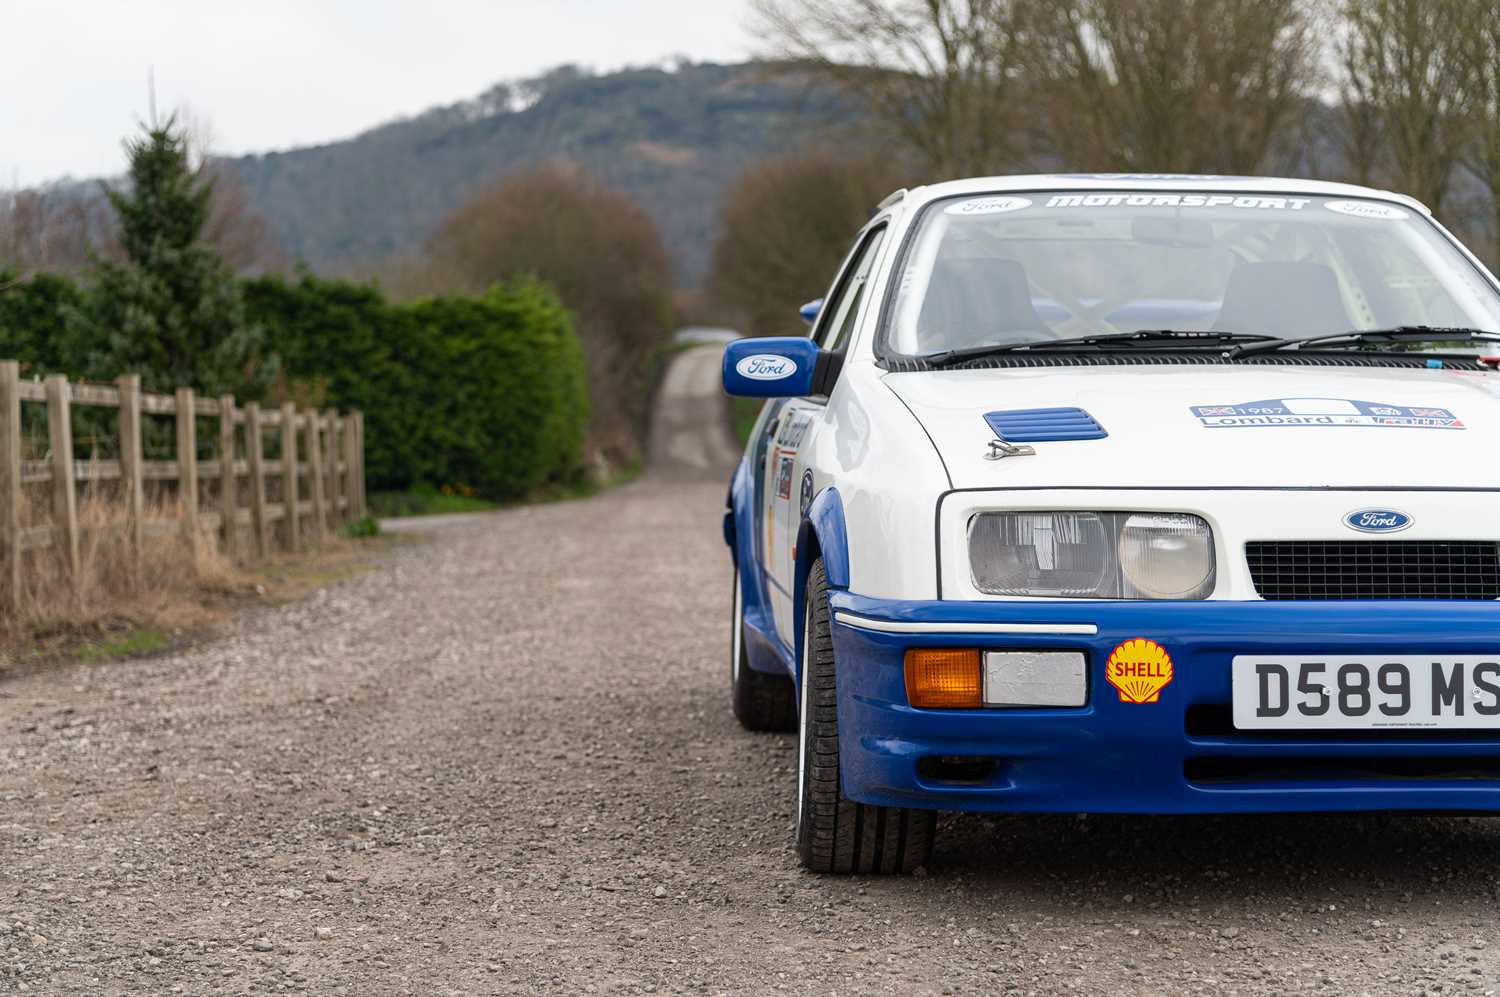 1986 Ford Sierra RS Cosworth - Image 2 of 73